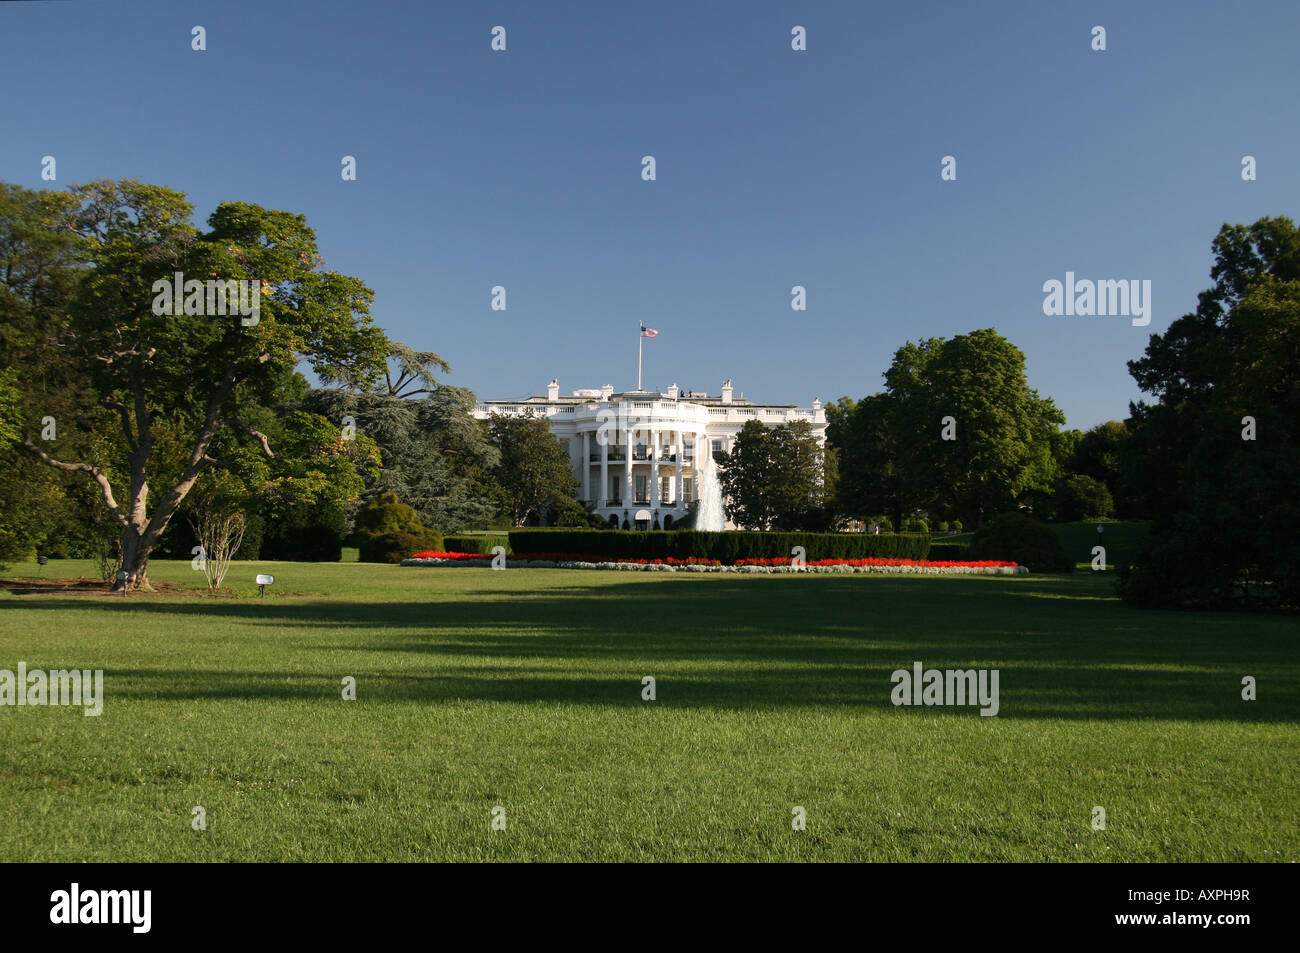 The South Portico of the White House, the official home of the President of the United States of America. Stock Photo